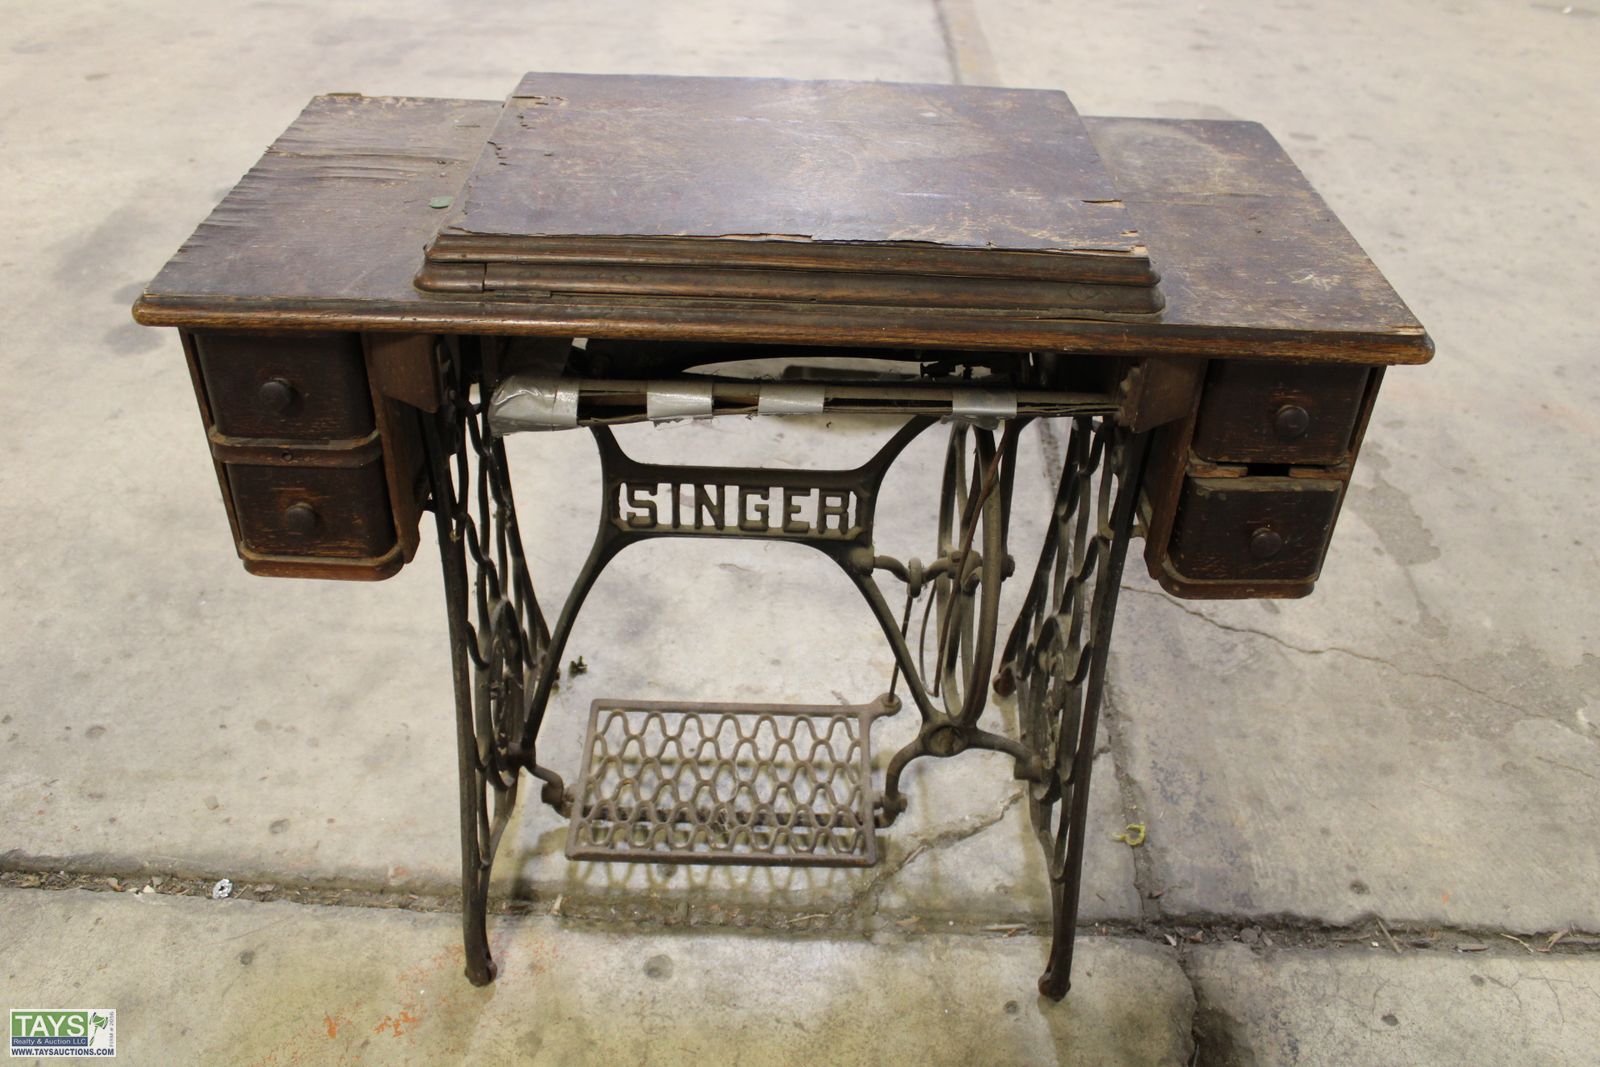 Tays Realty & Auction - Auction: ONLINE ABSOLUTE AUCTION: FURNITURE - HOME  DECOR - GLASSWARE ITEM: Singer Antique Sewing Machine